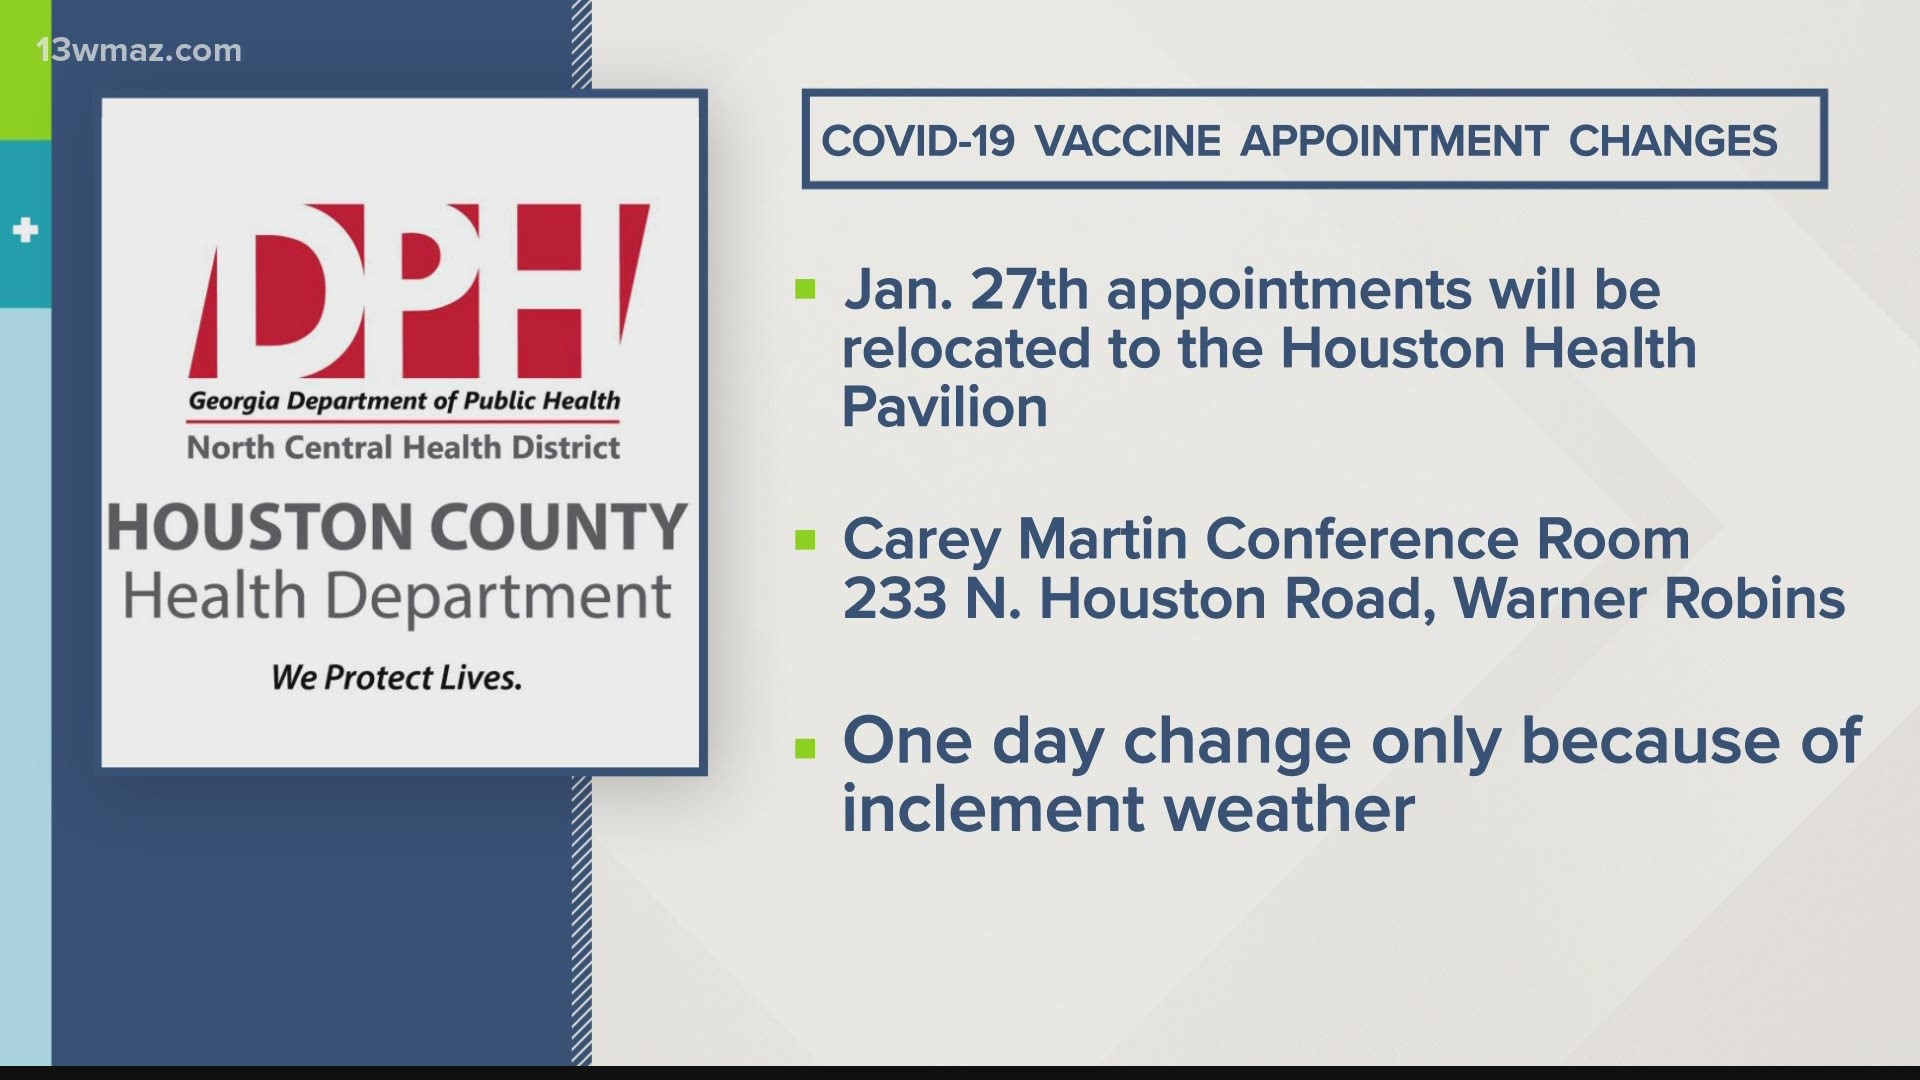 Wednesday only, vaccine appointments will be handled at the Houston Health Pavilion in the Carey Martin Conference Room located at 233 North Houston Road.